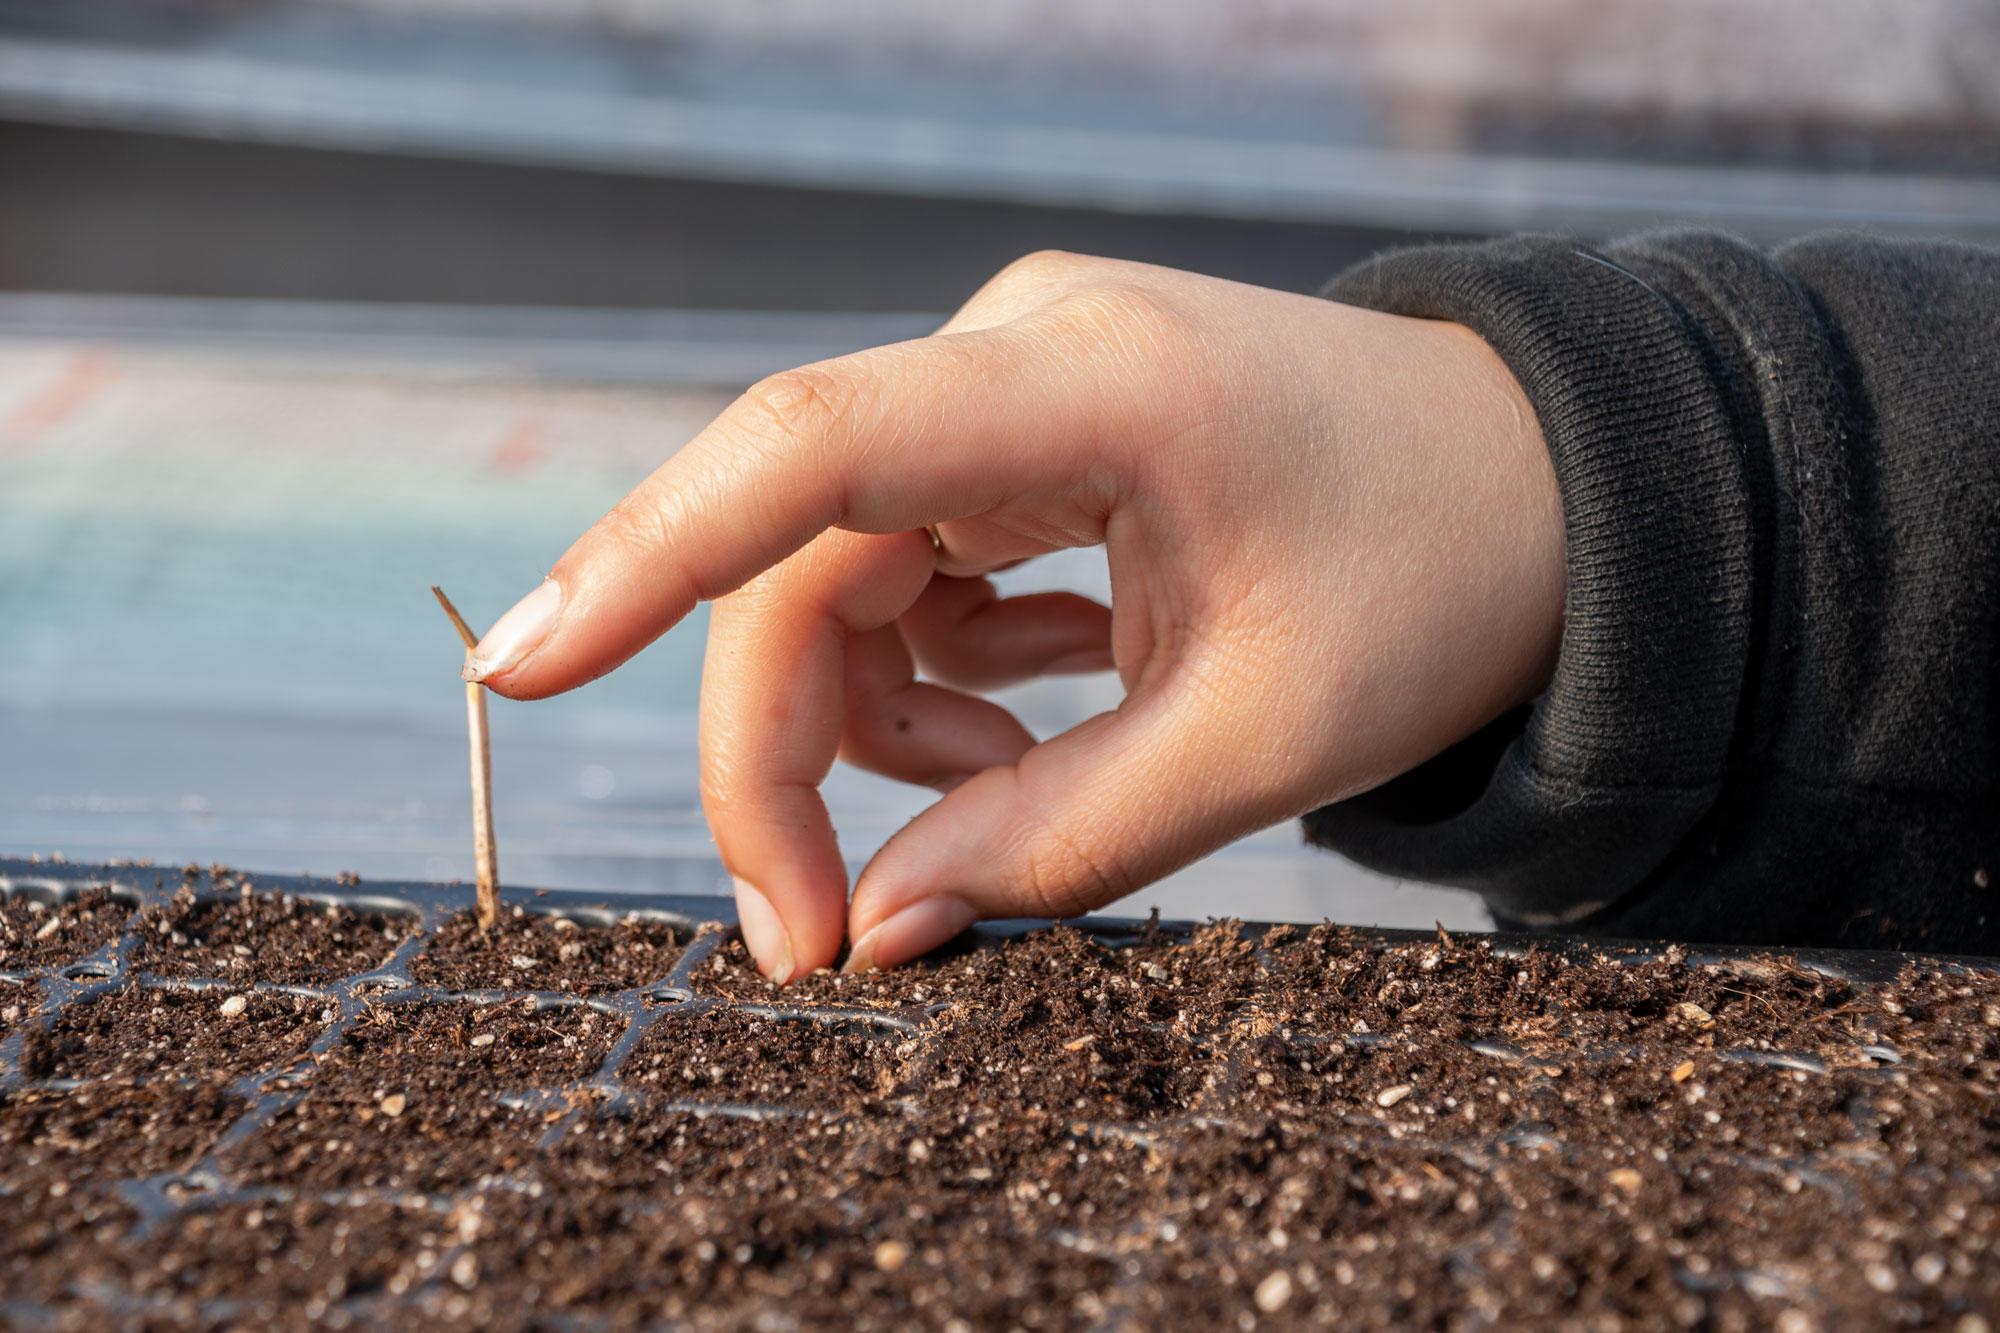 Planting a tomato seed in a greenhouse.